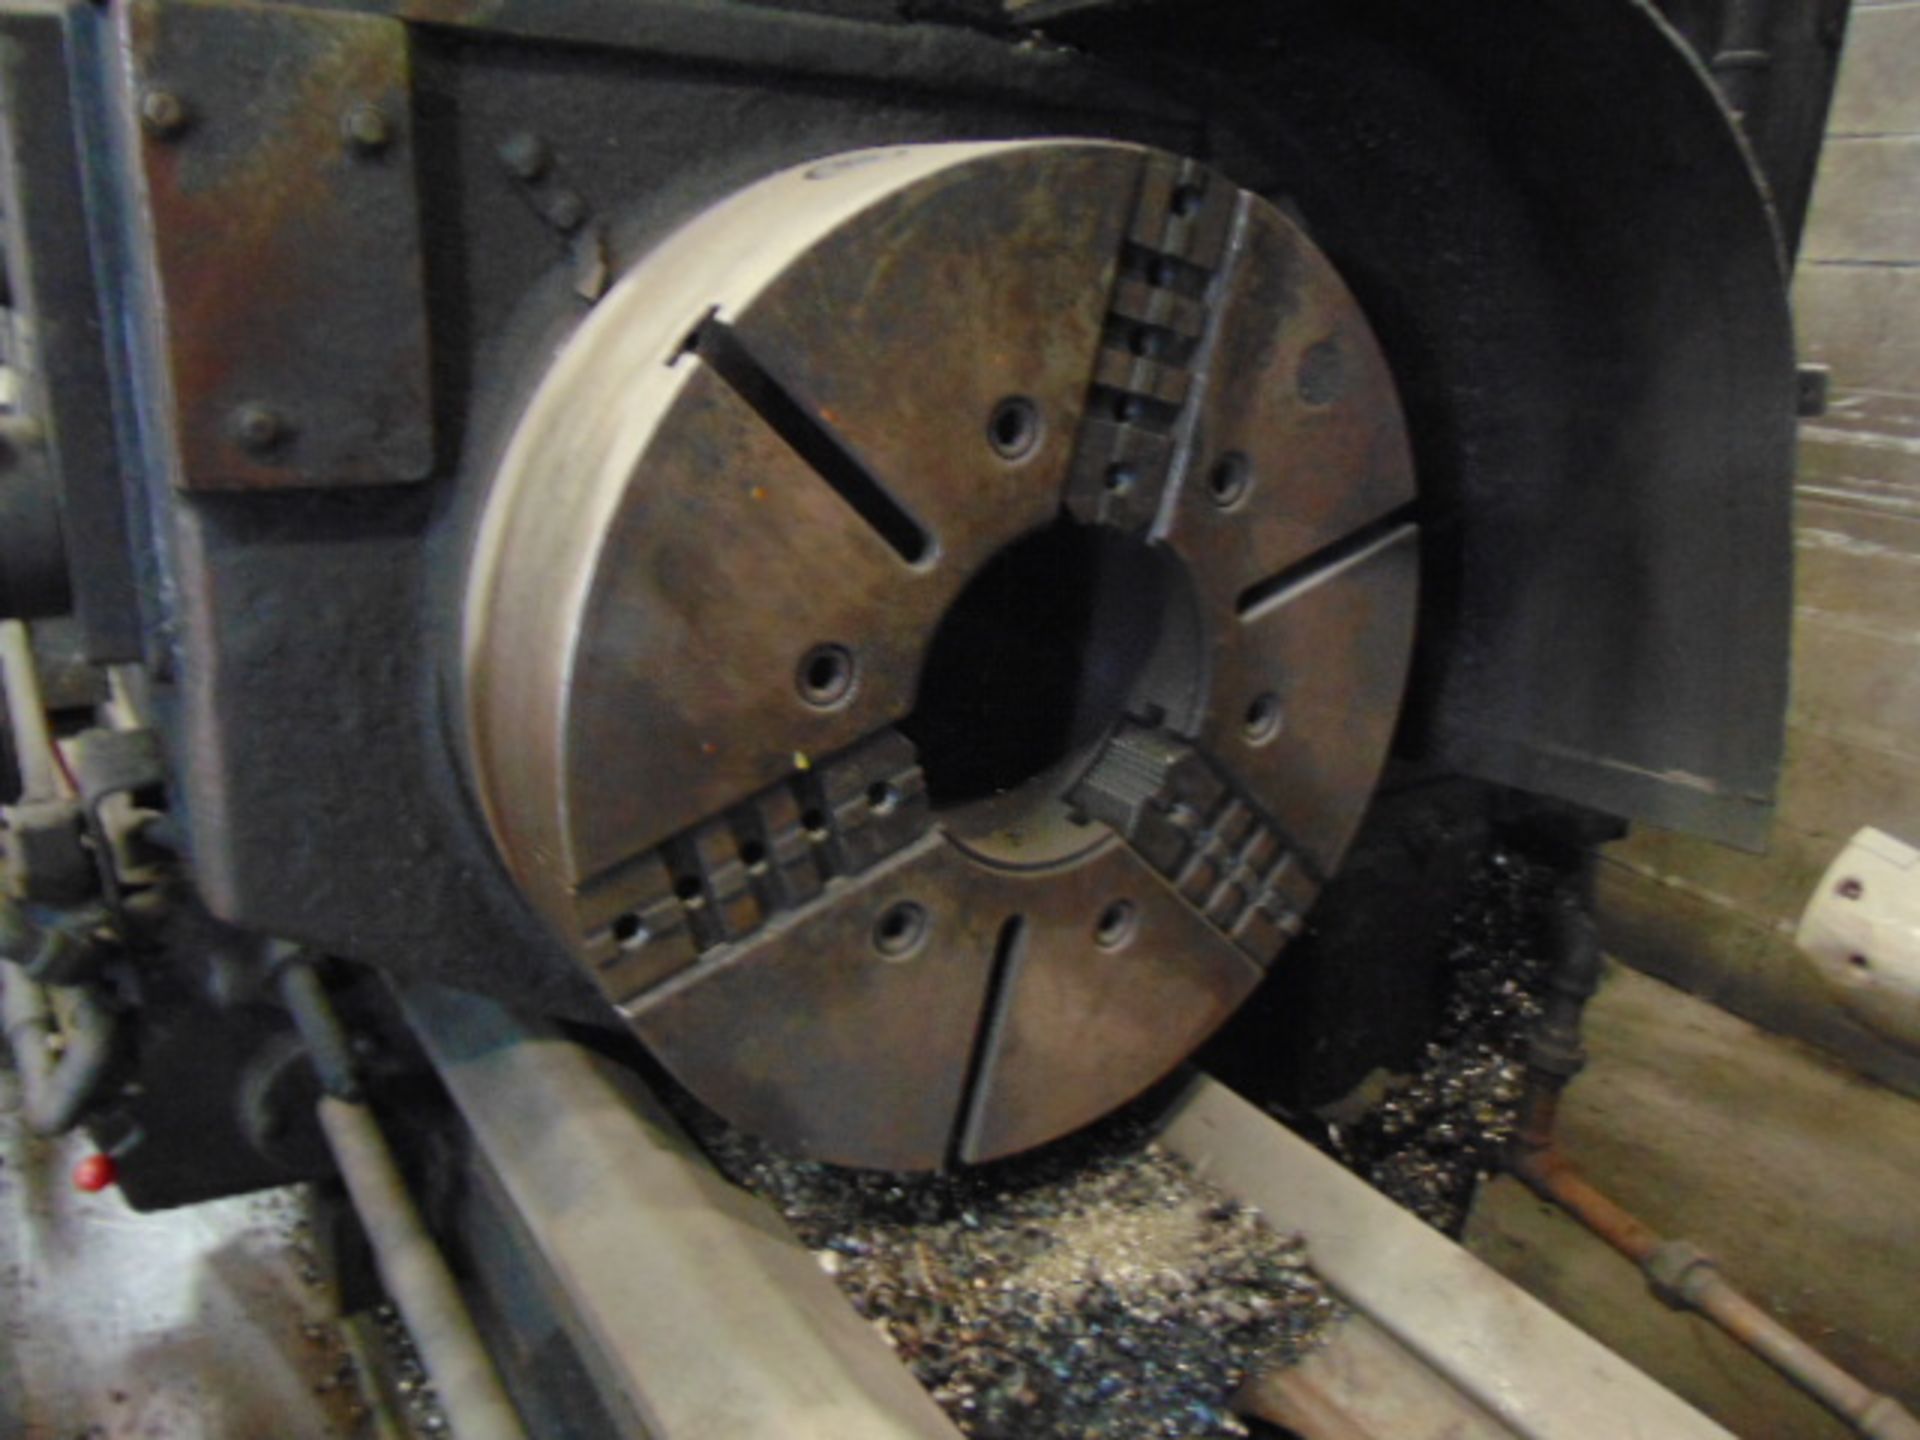 TURRET LATHE, WARNER & SWASEY 4A MDL. M-3550, 9.5" bore, 24" 3-jaw chuck, S/N 1546007 (Loading - Image 2 of 9